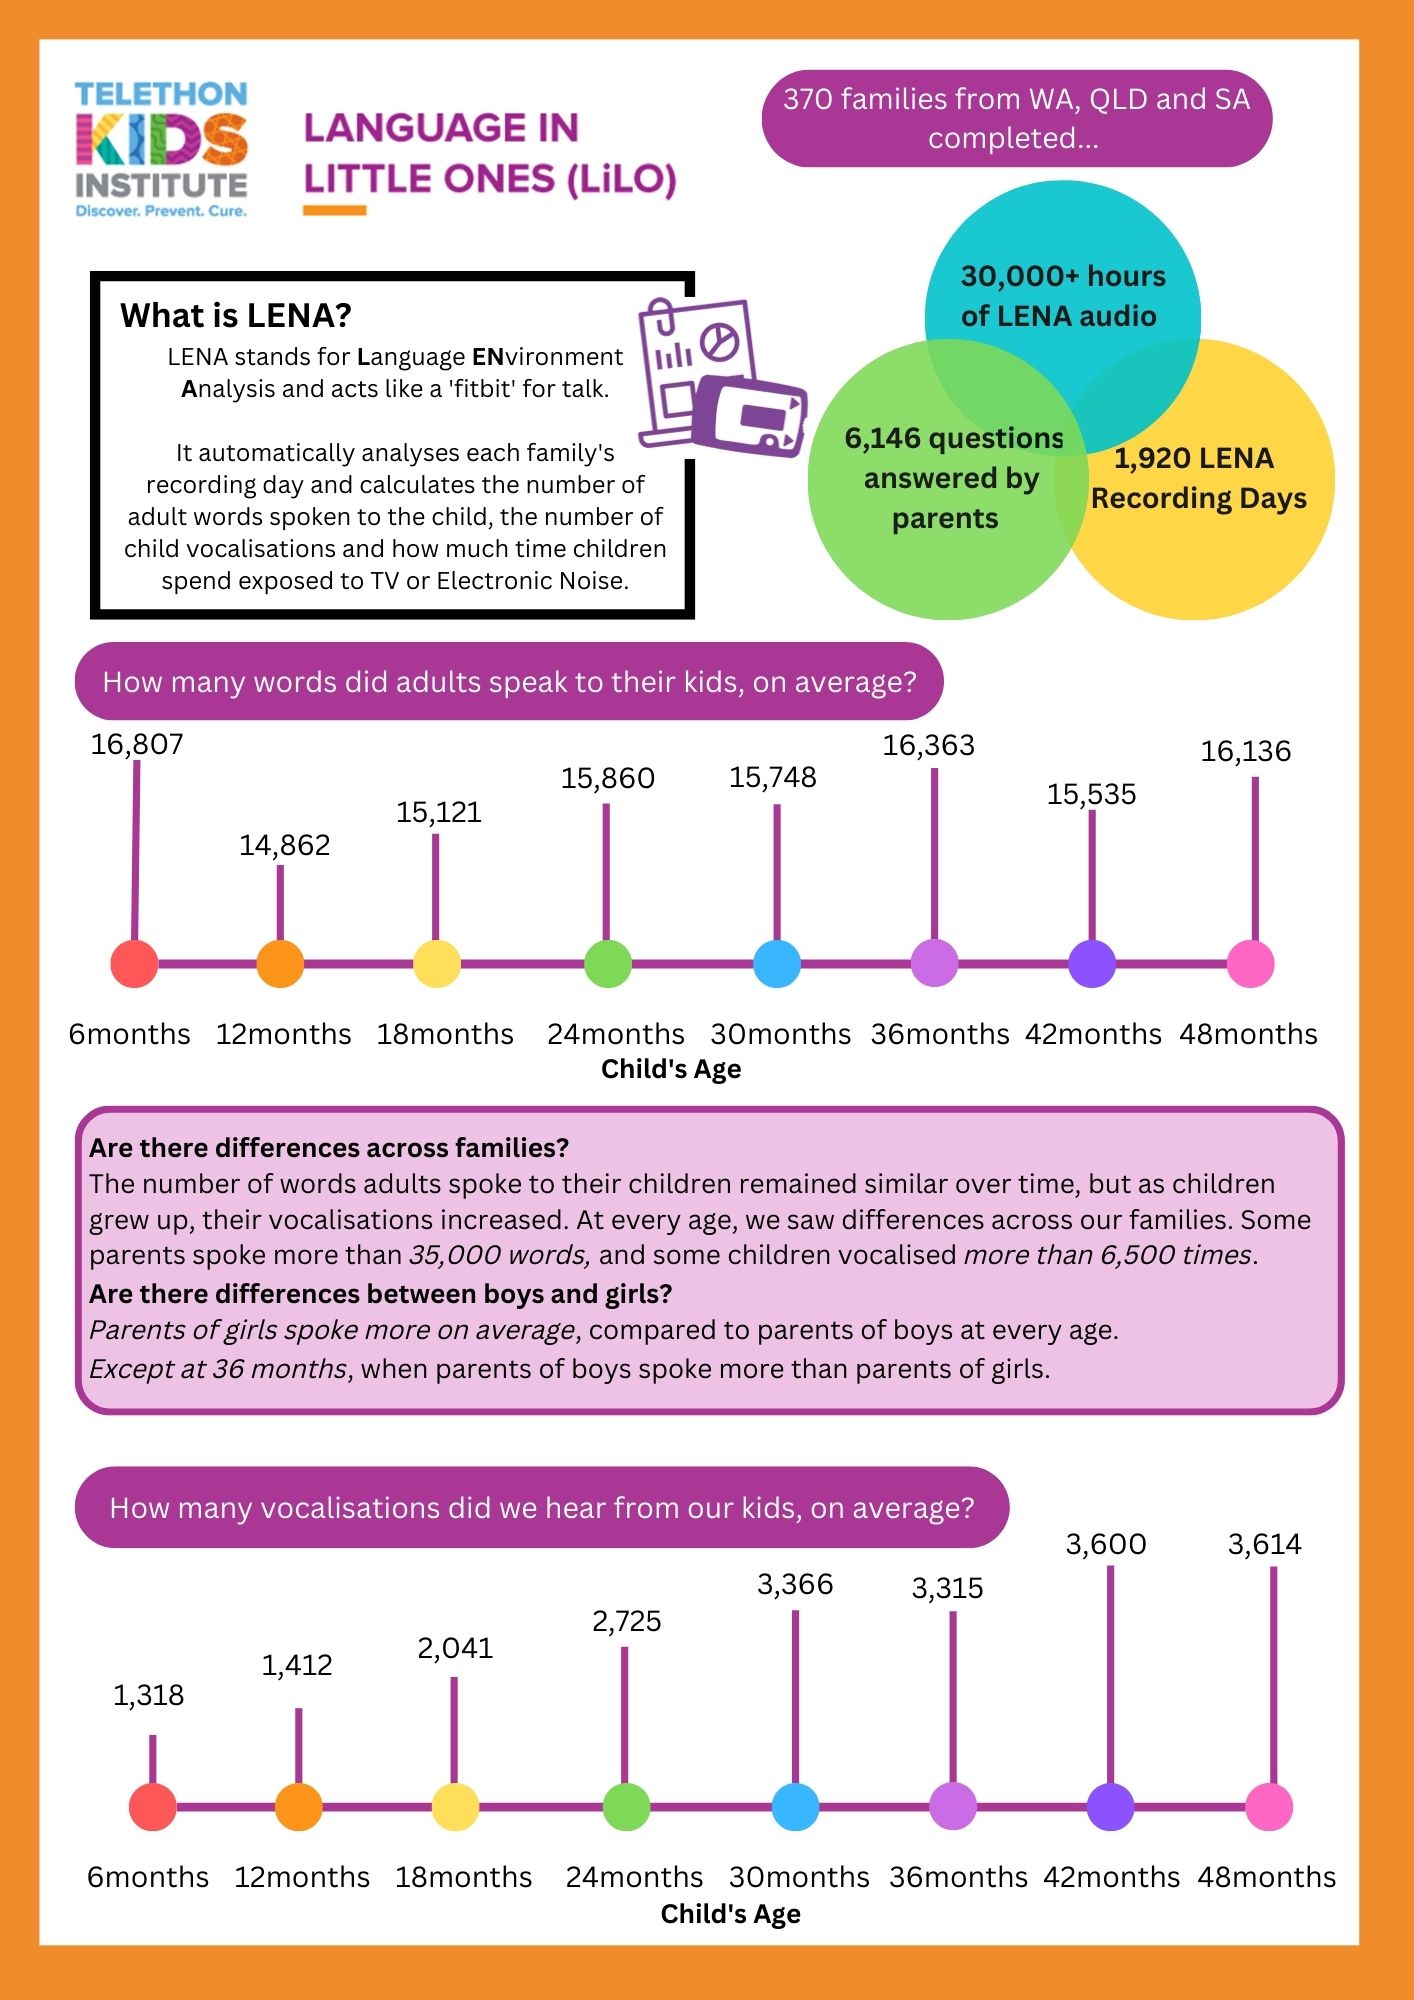 An infographic depicting some key findings from the language in little ones study. It indicates that 370 families from WA, QLD, and SA completed the study. 30,000+ hours of LENA audio were sampled, 6,146 questions were answered by parents, and there were 1,920 LENA recording days. It indicates that the number of words adults spoke to their children remained similar over time, but as children grew up, their vocalisations increased. At every age, differences were seen across families. Some parents spoke more than 35,000 words, and some children vocalised more than 6,500 times. Parents of girls spoke more on average compared to parents of boys at every age, except at 36 months, where parents of boys spoke more than parents of girls.